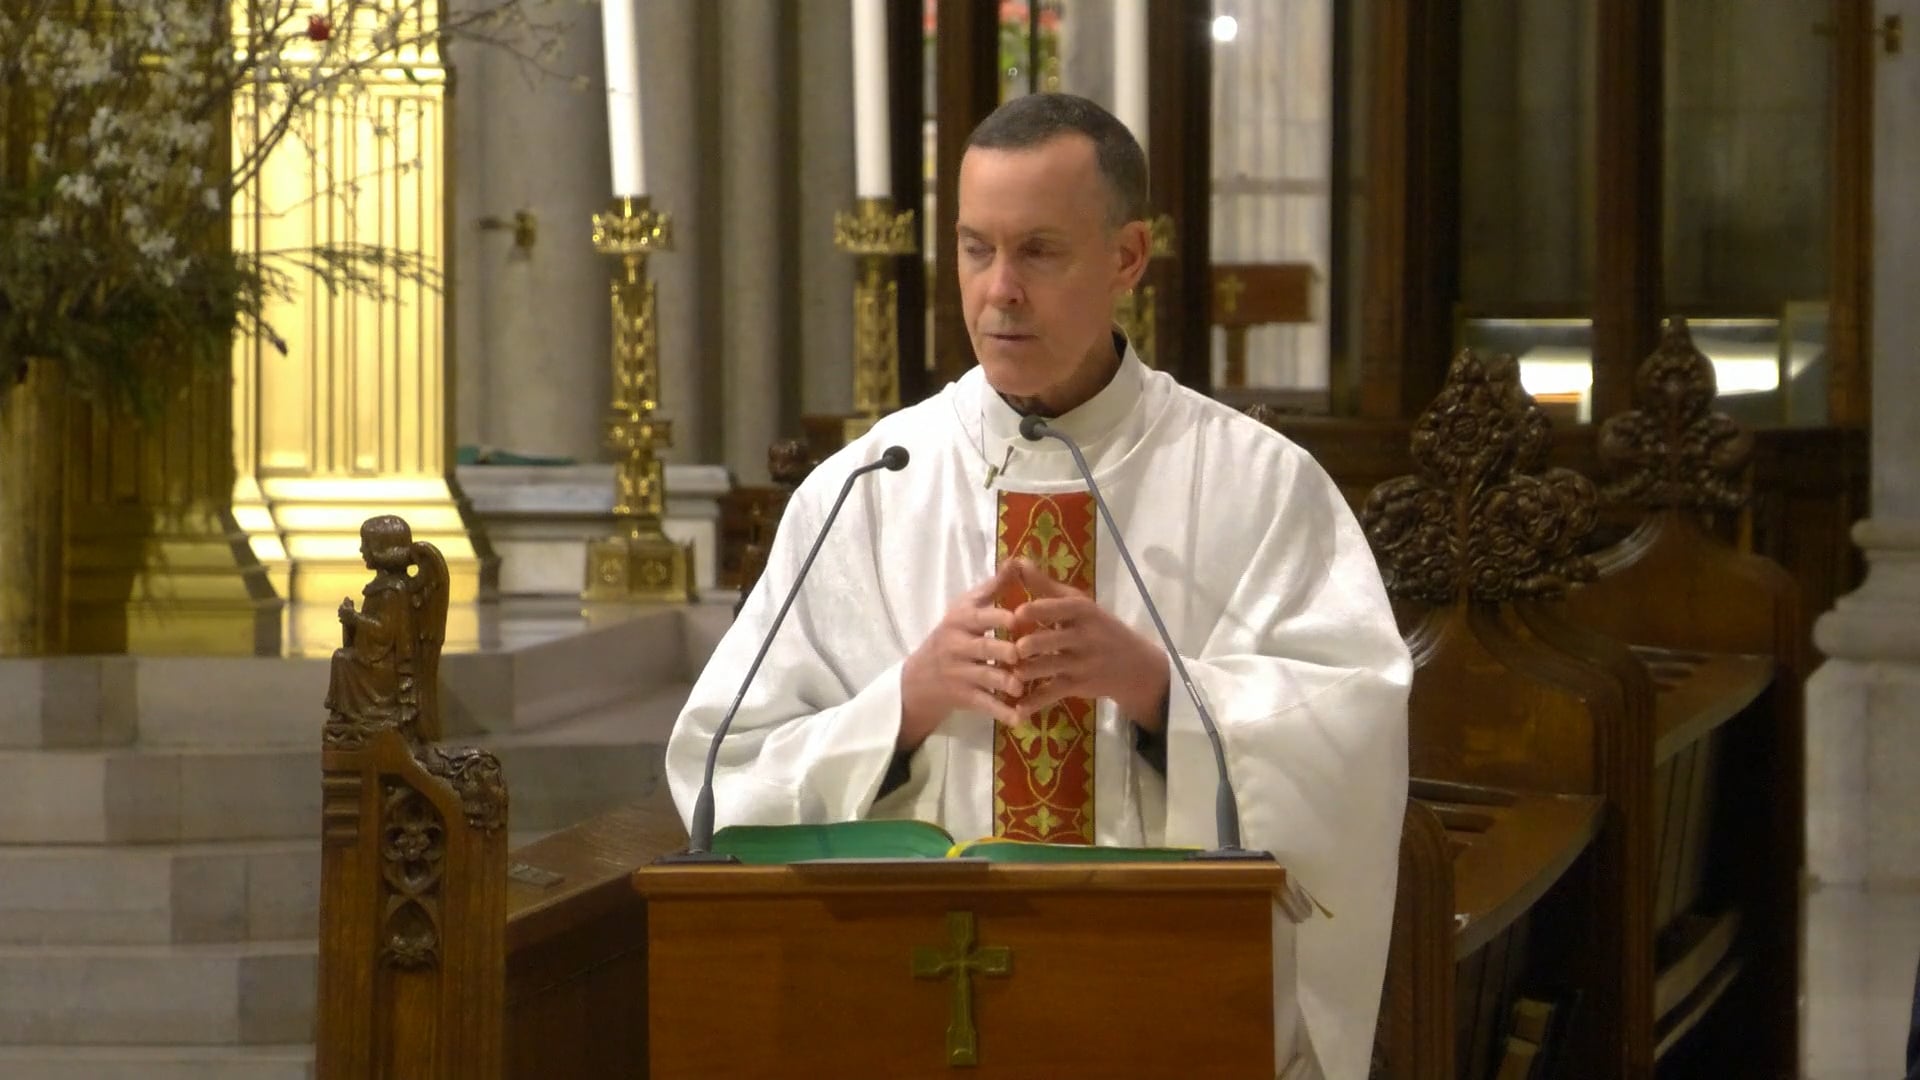 Mass from St. Patrick's Cathedral - January 19, 2023